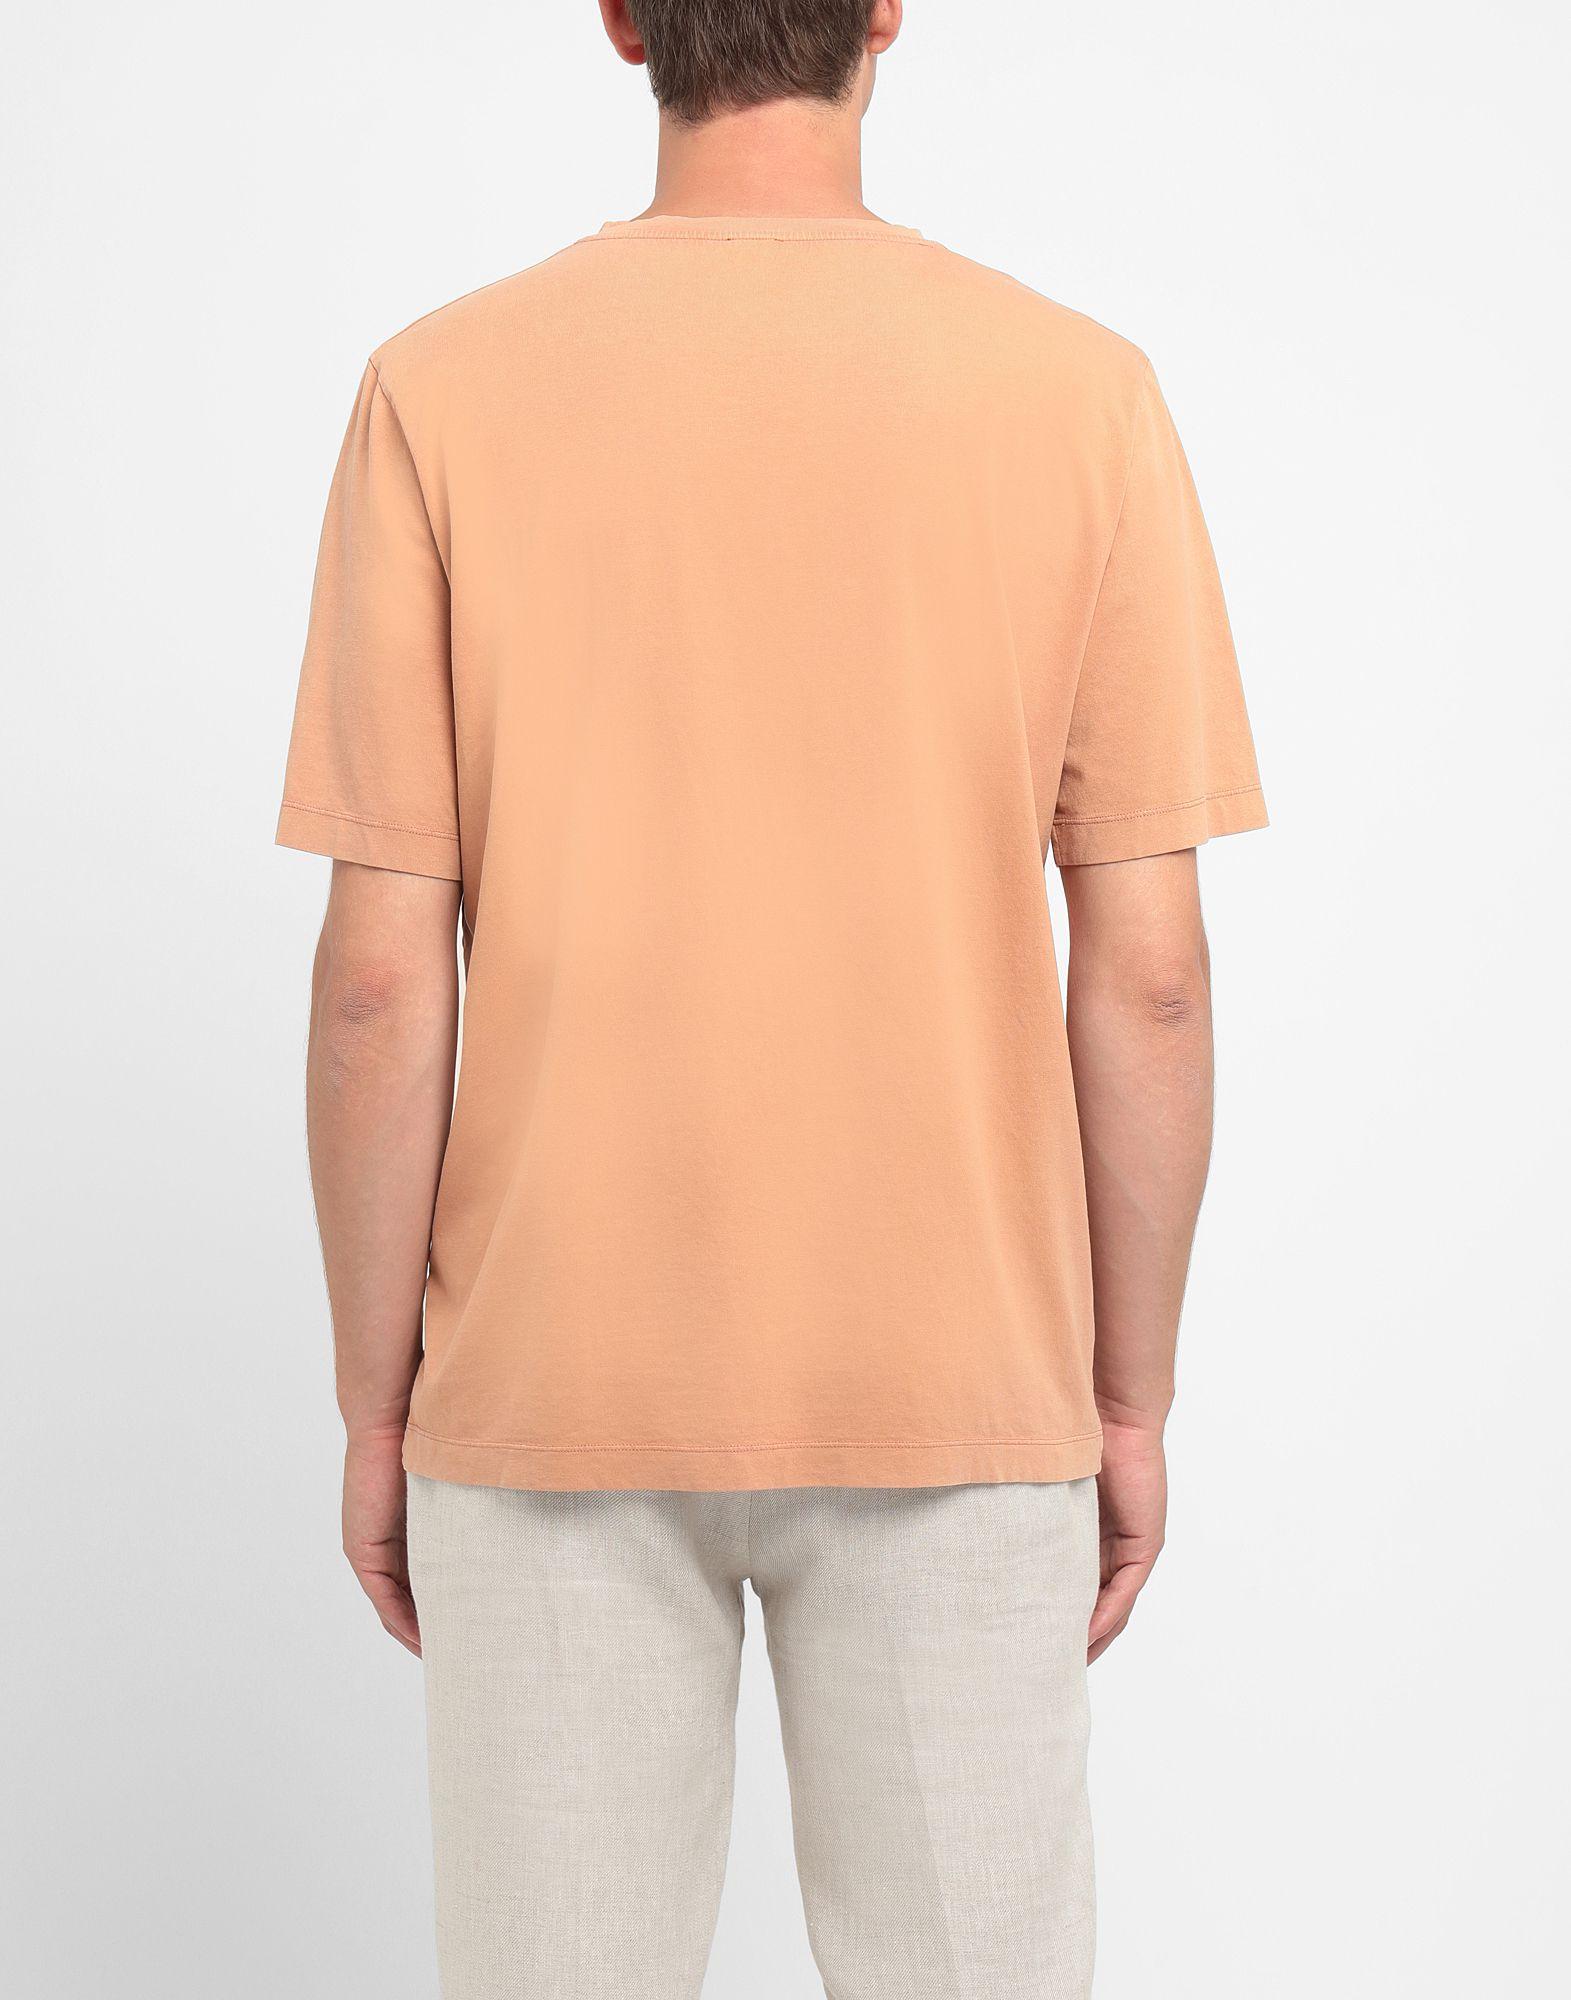 8 by YOOX Cotton T-shirt in Light Brown (Brown) for Men - Lyst